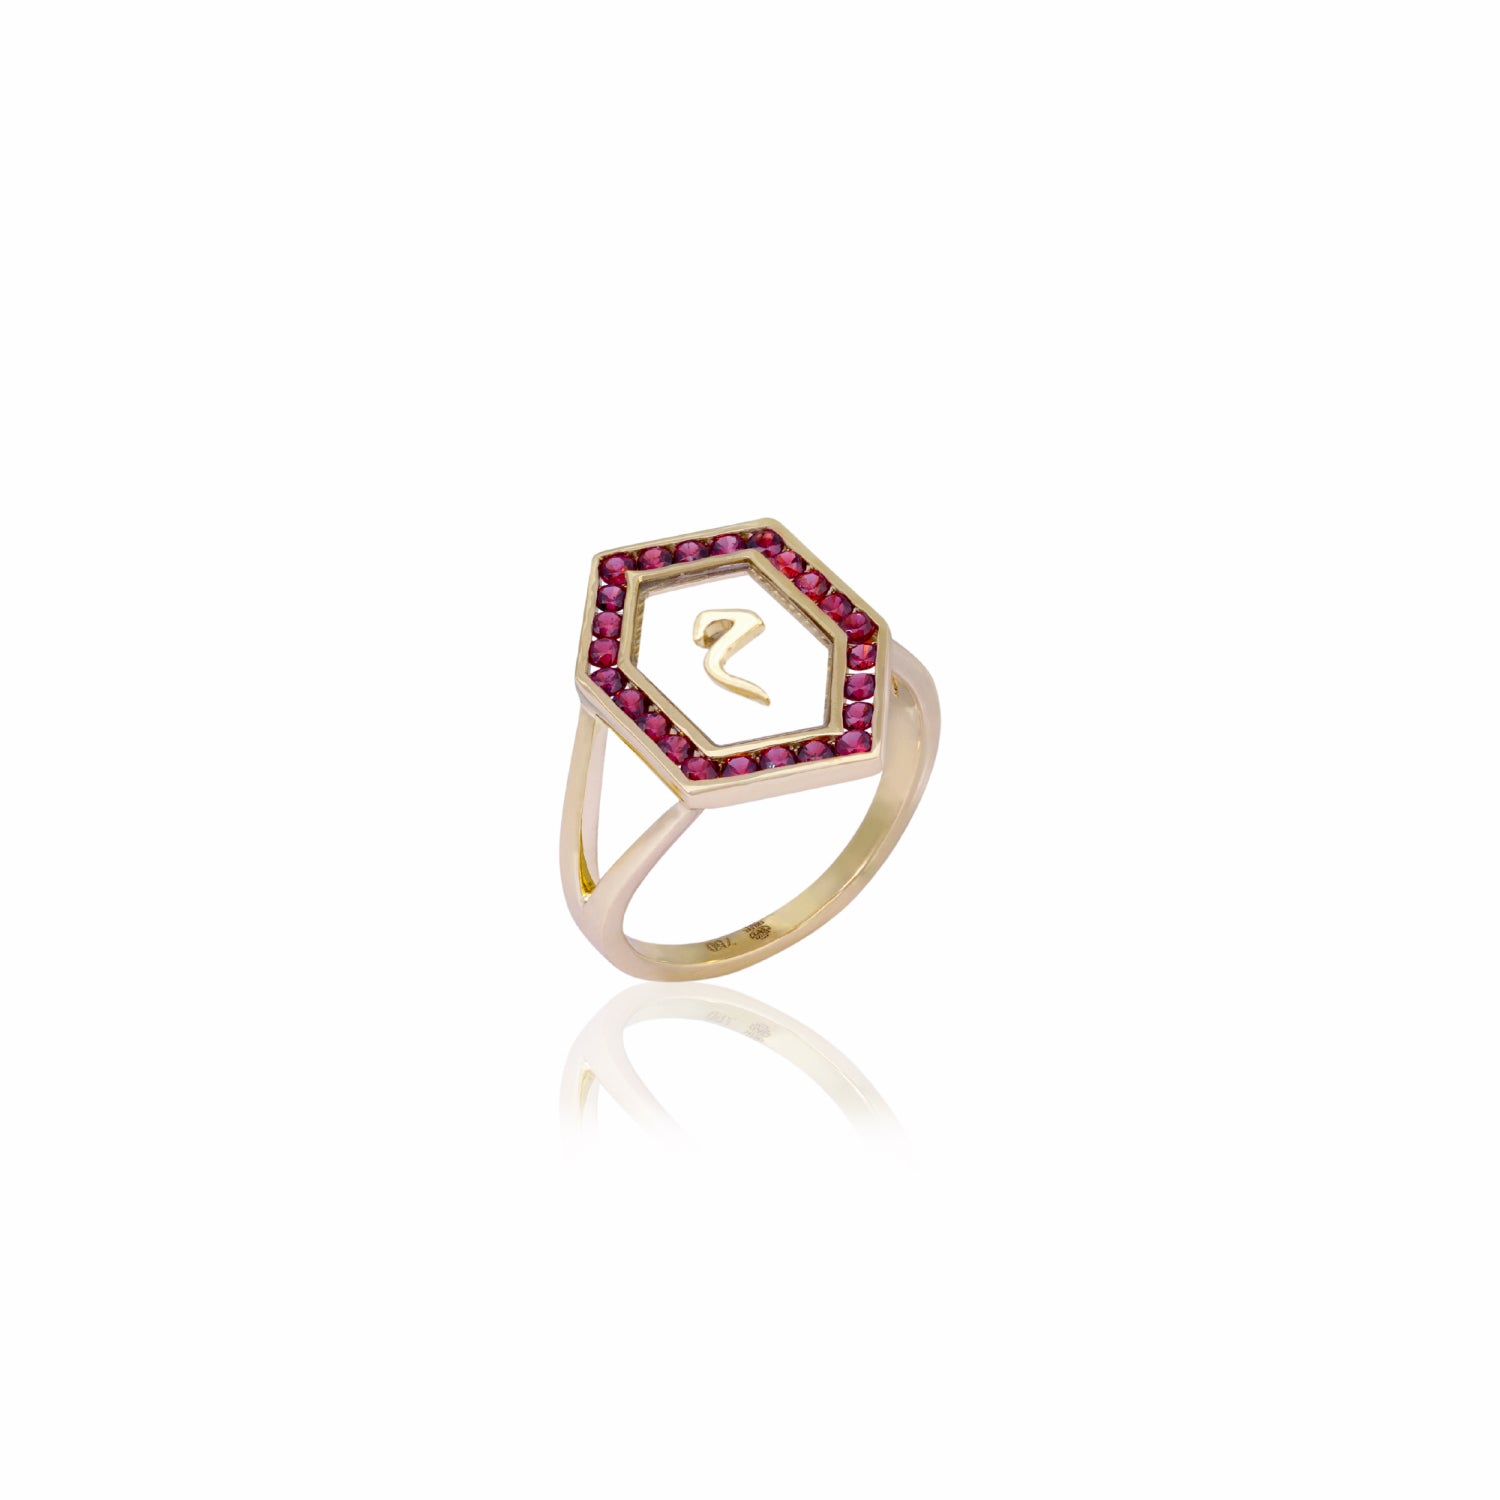 Qamoos 1.0 Letter م Ruby Ring in Yellow Gold